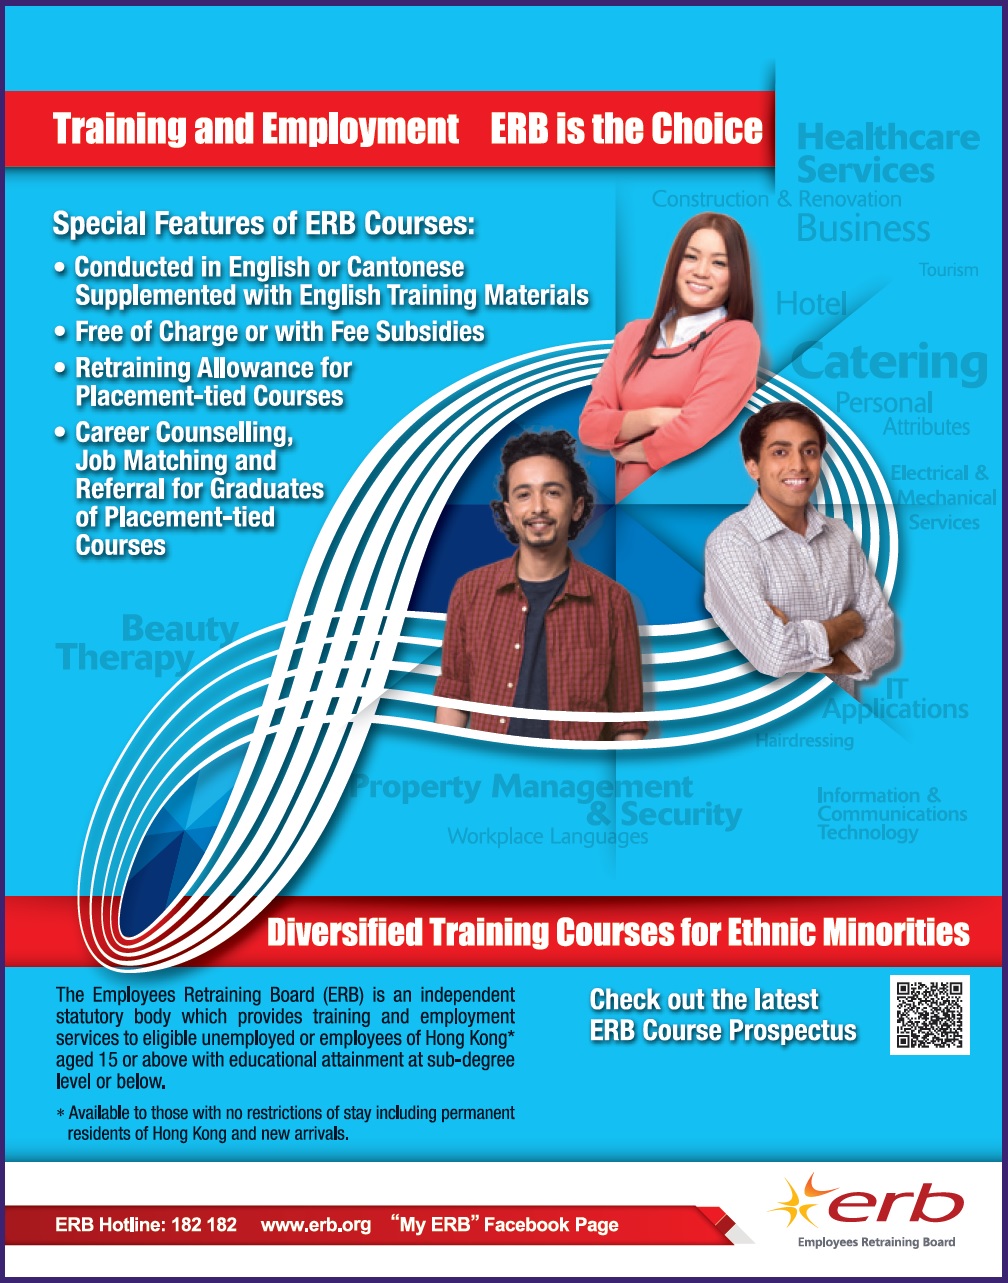 Click here to download the image version of newspaper advertisement of Training for Ethnic Minorities (May 2018) (English)